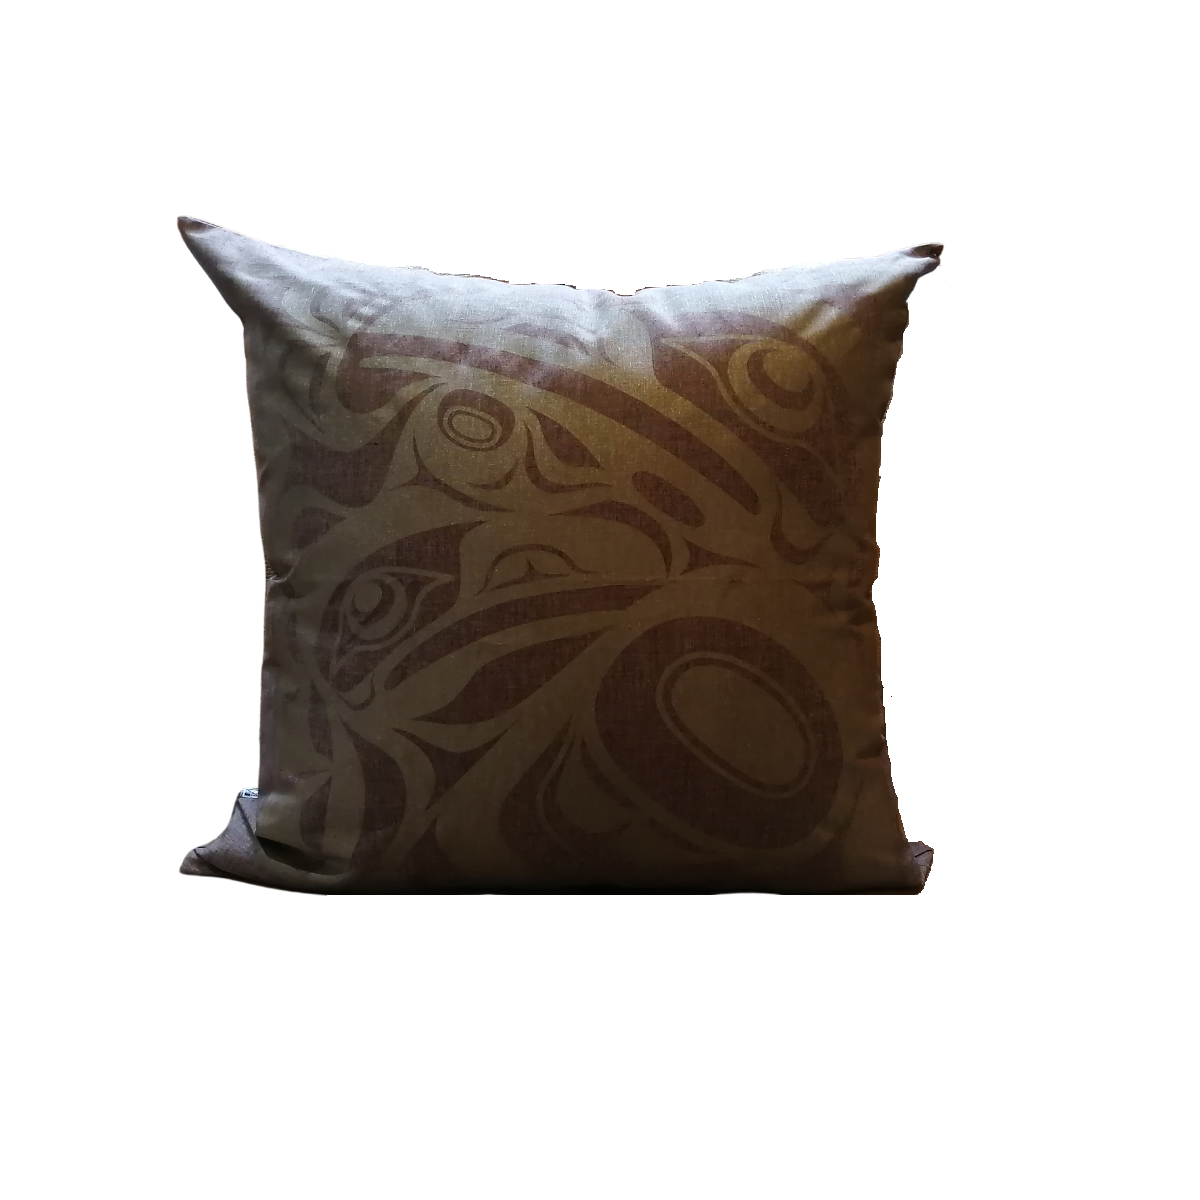 Hemp Pillow Cover 18x18 - Raven Mother & Child by Totem Design House (Warm Brown)-Pillow Case-Totem Design House-[designed in bc]-[authentic indigenous]-[canada native art]-All The Good Things From BC